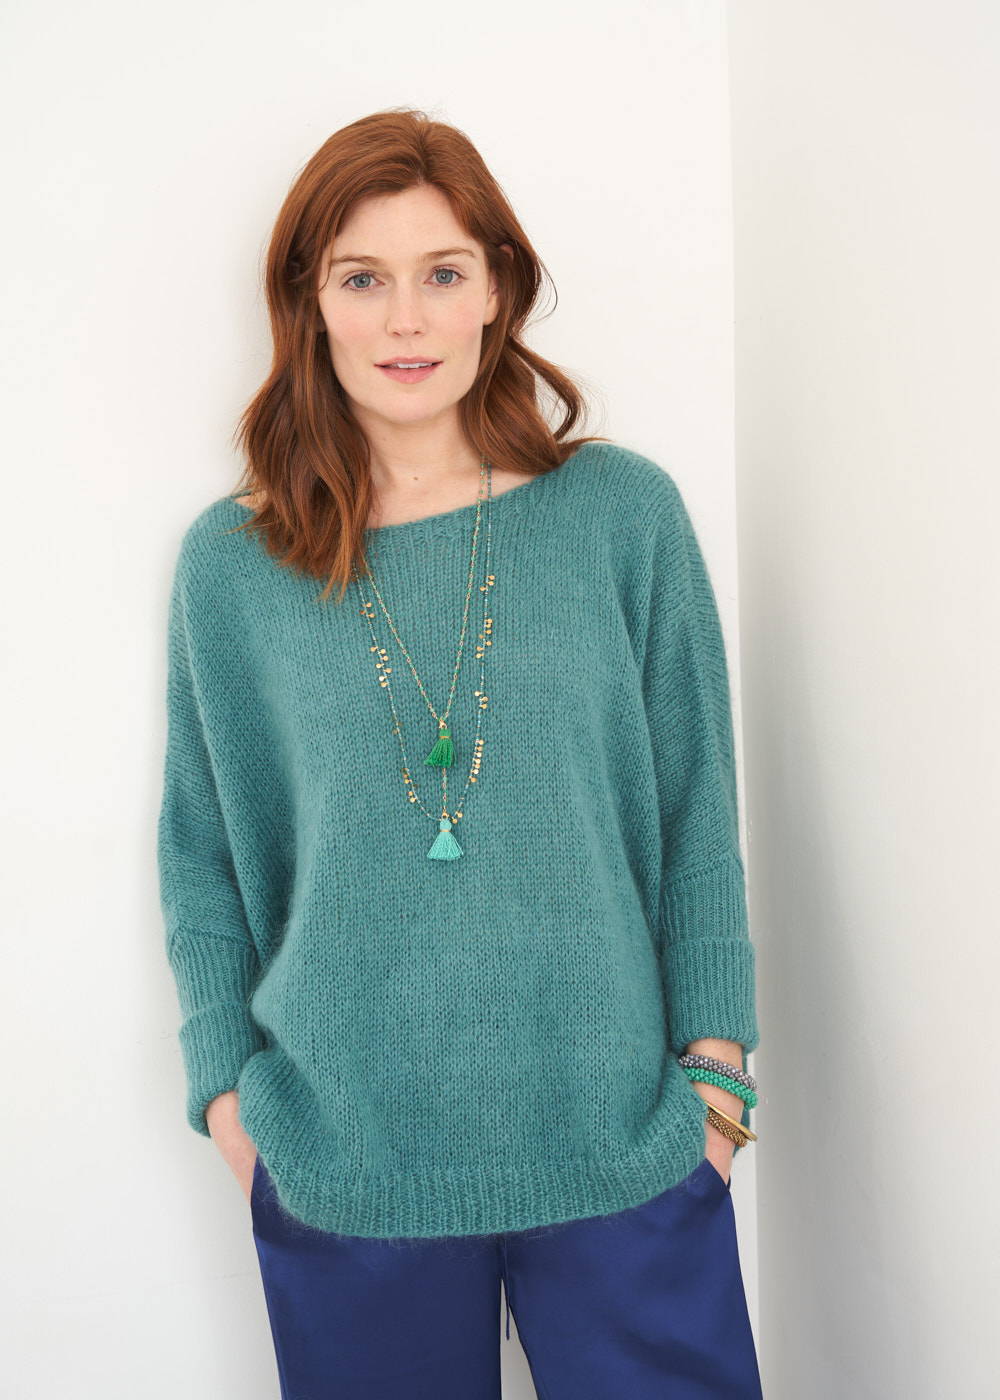 A model wearing a teal green knitted slouchy sweater